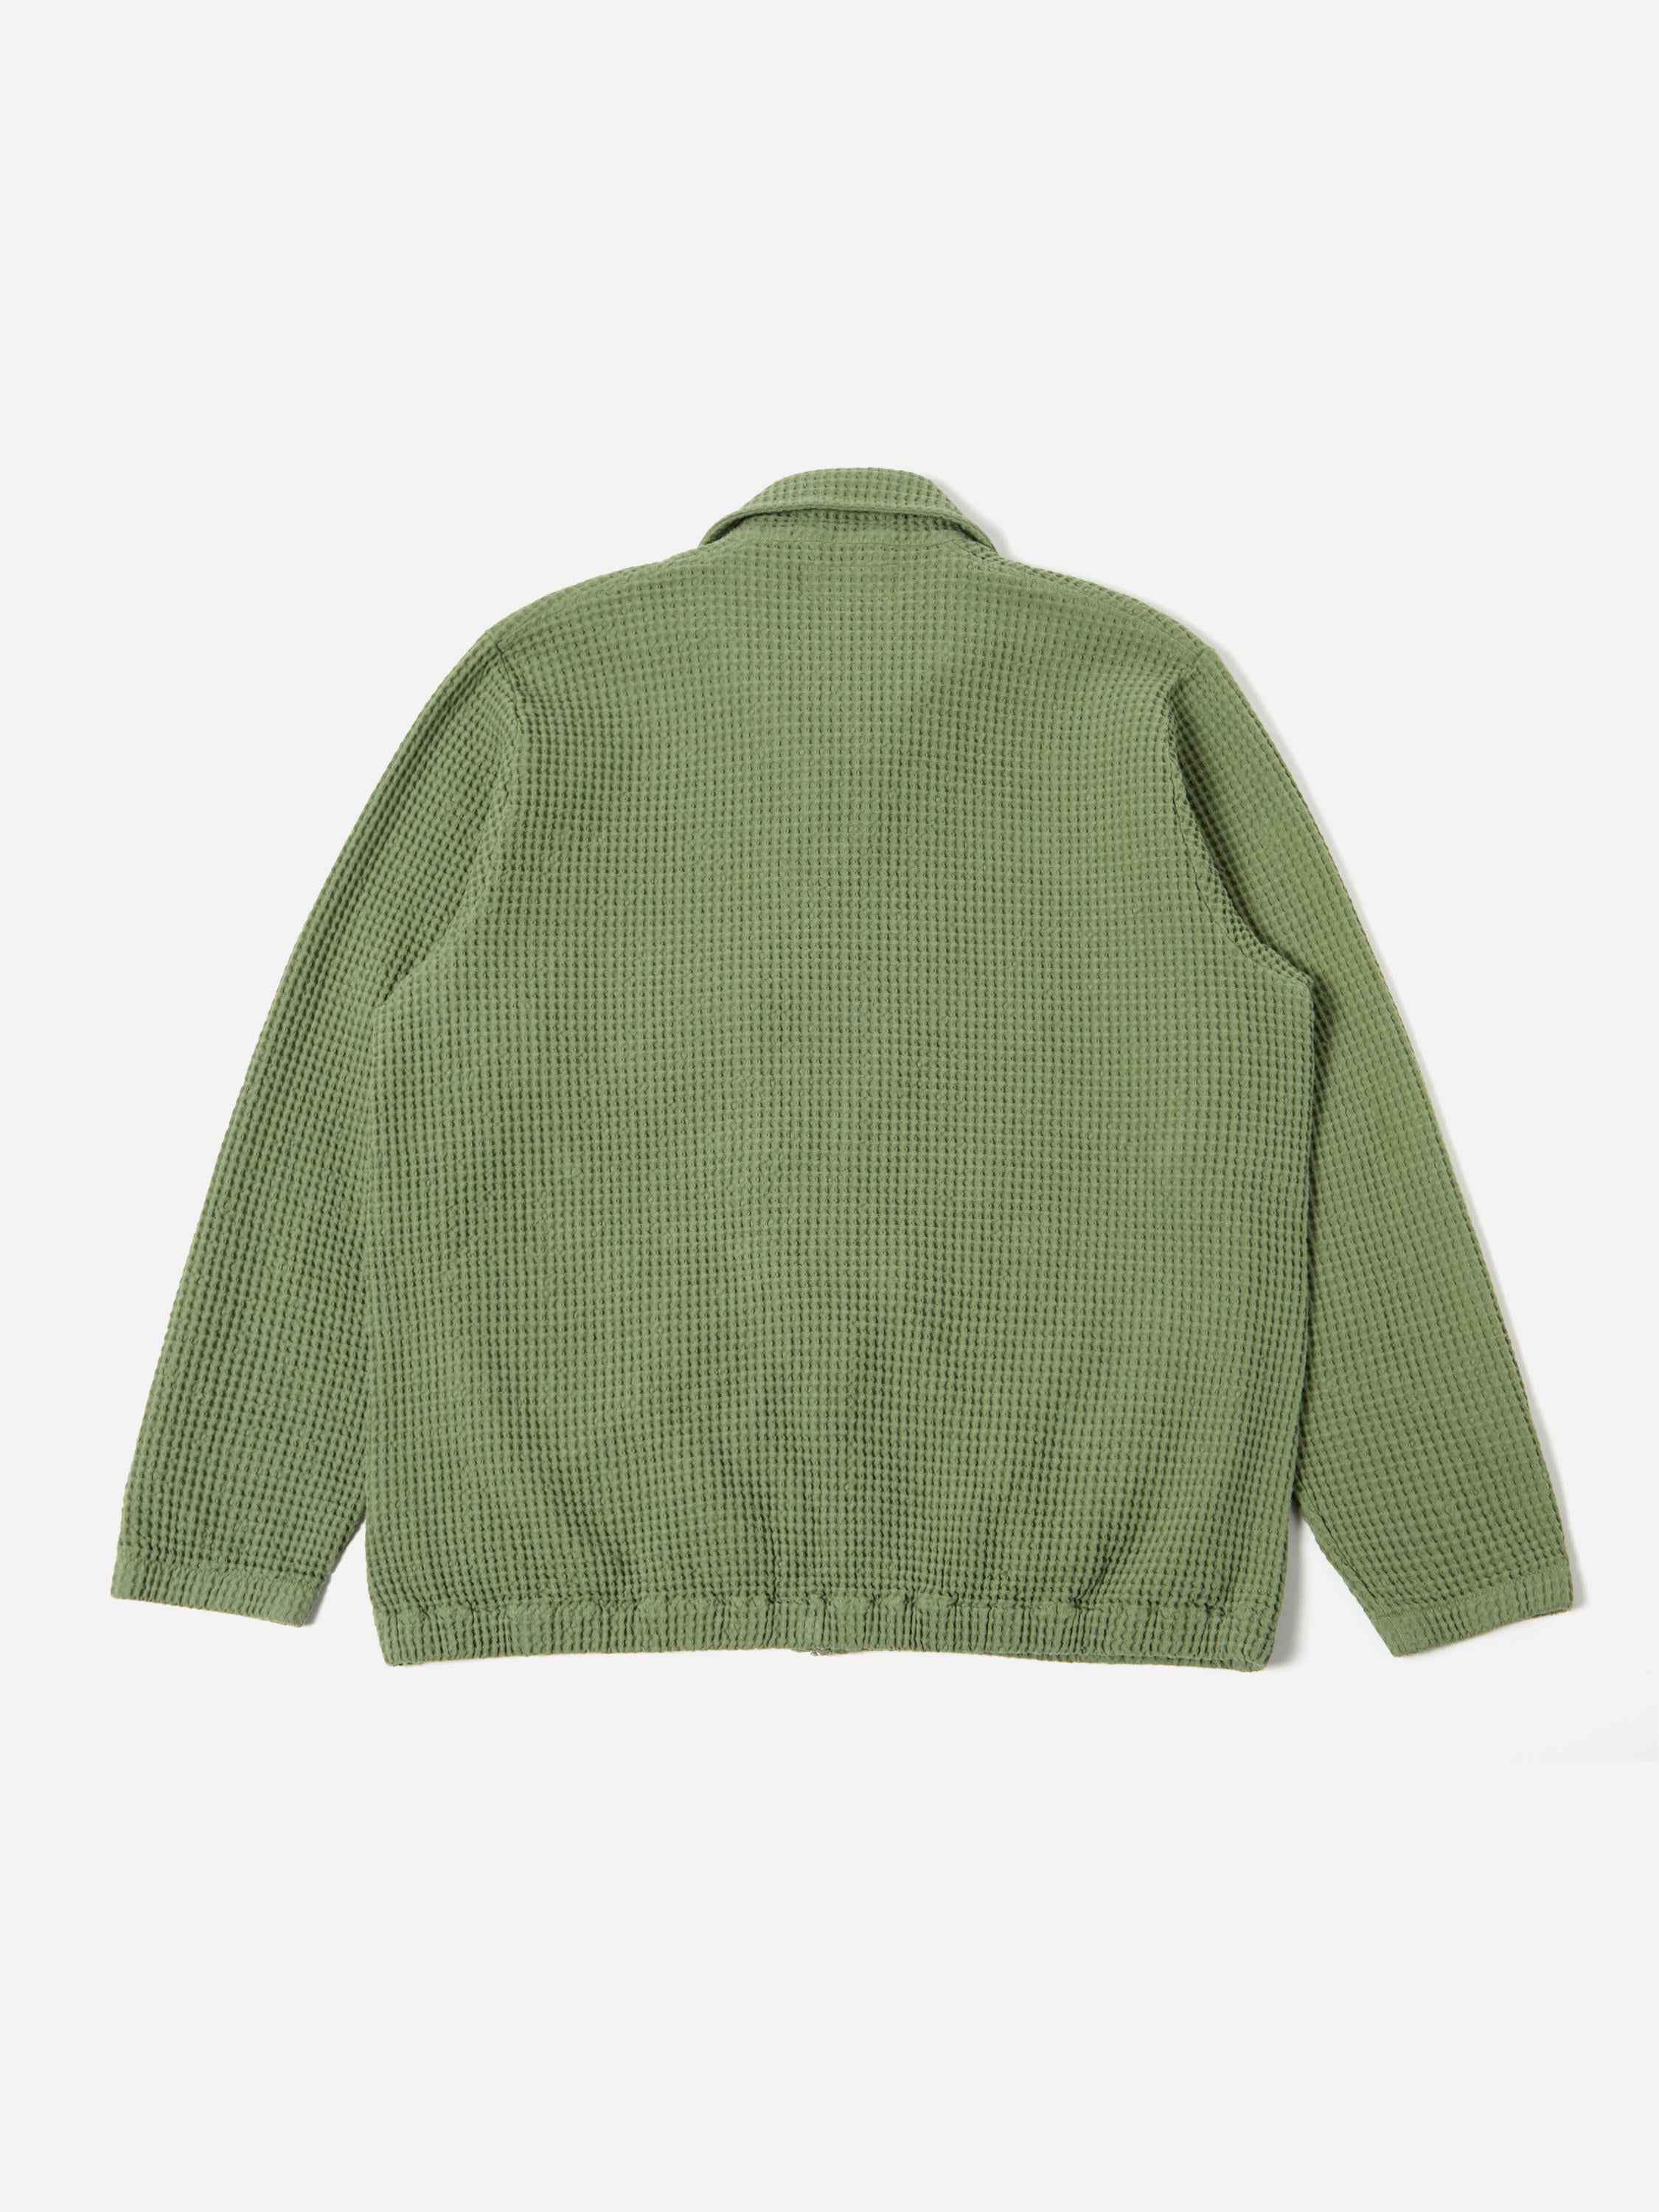 Universal Works K Track Top in Birch Pike Waffle